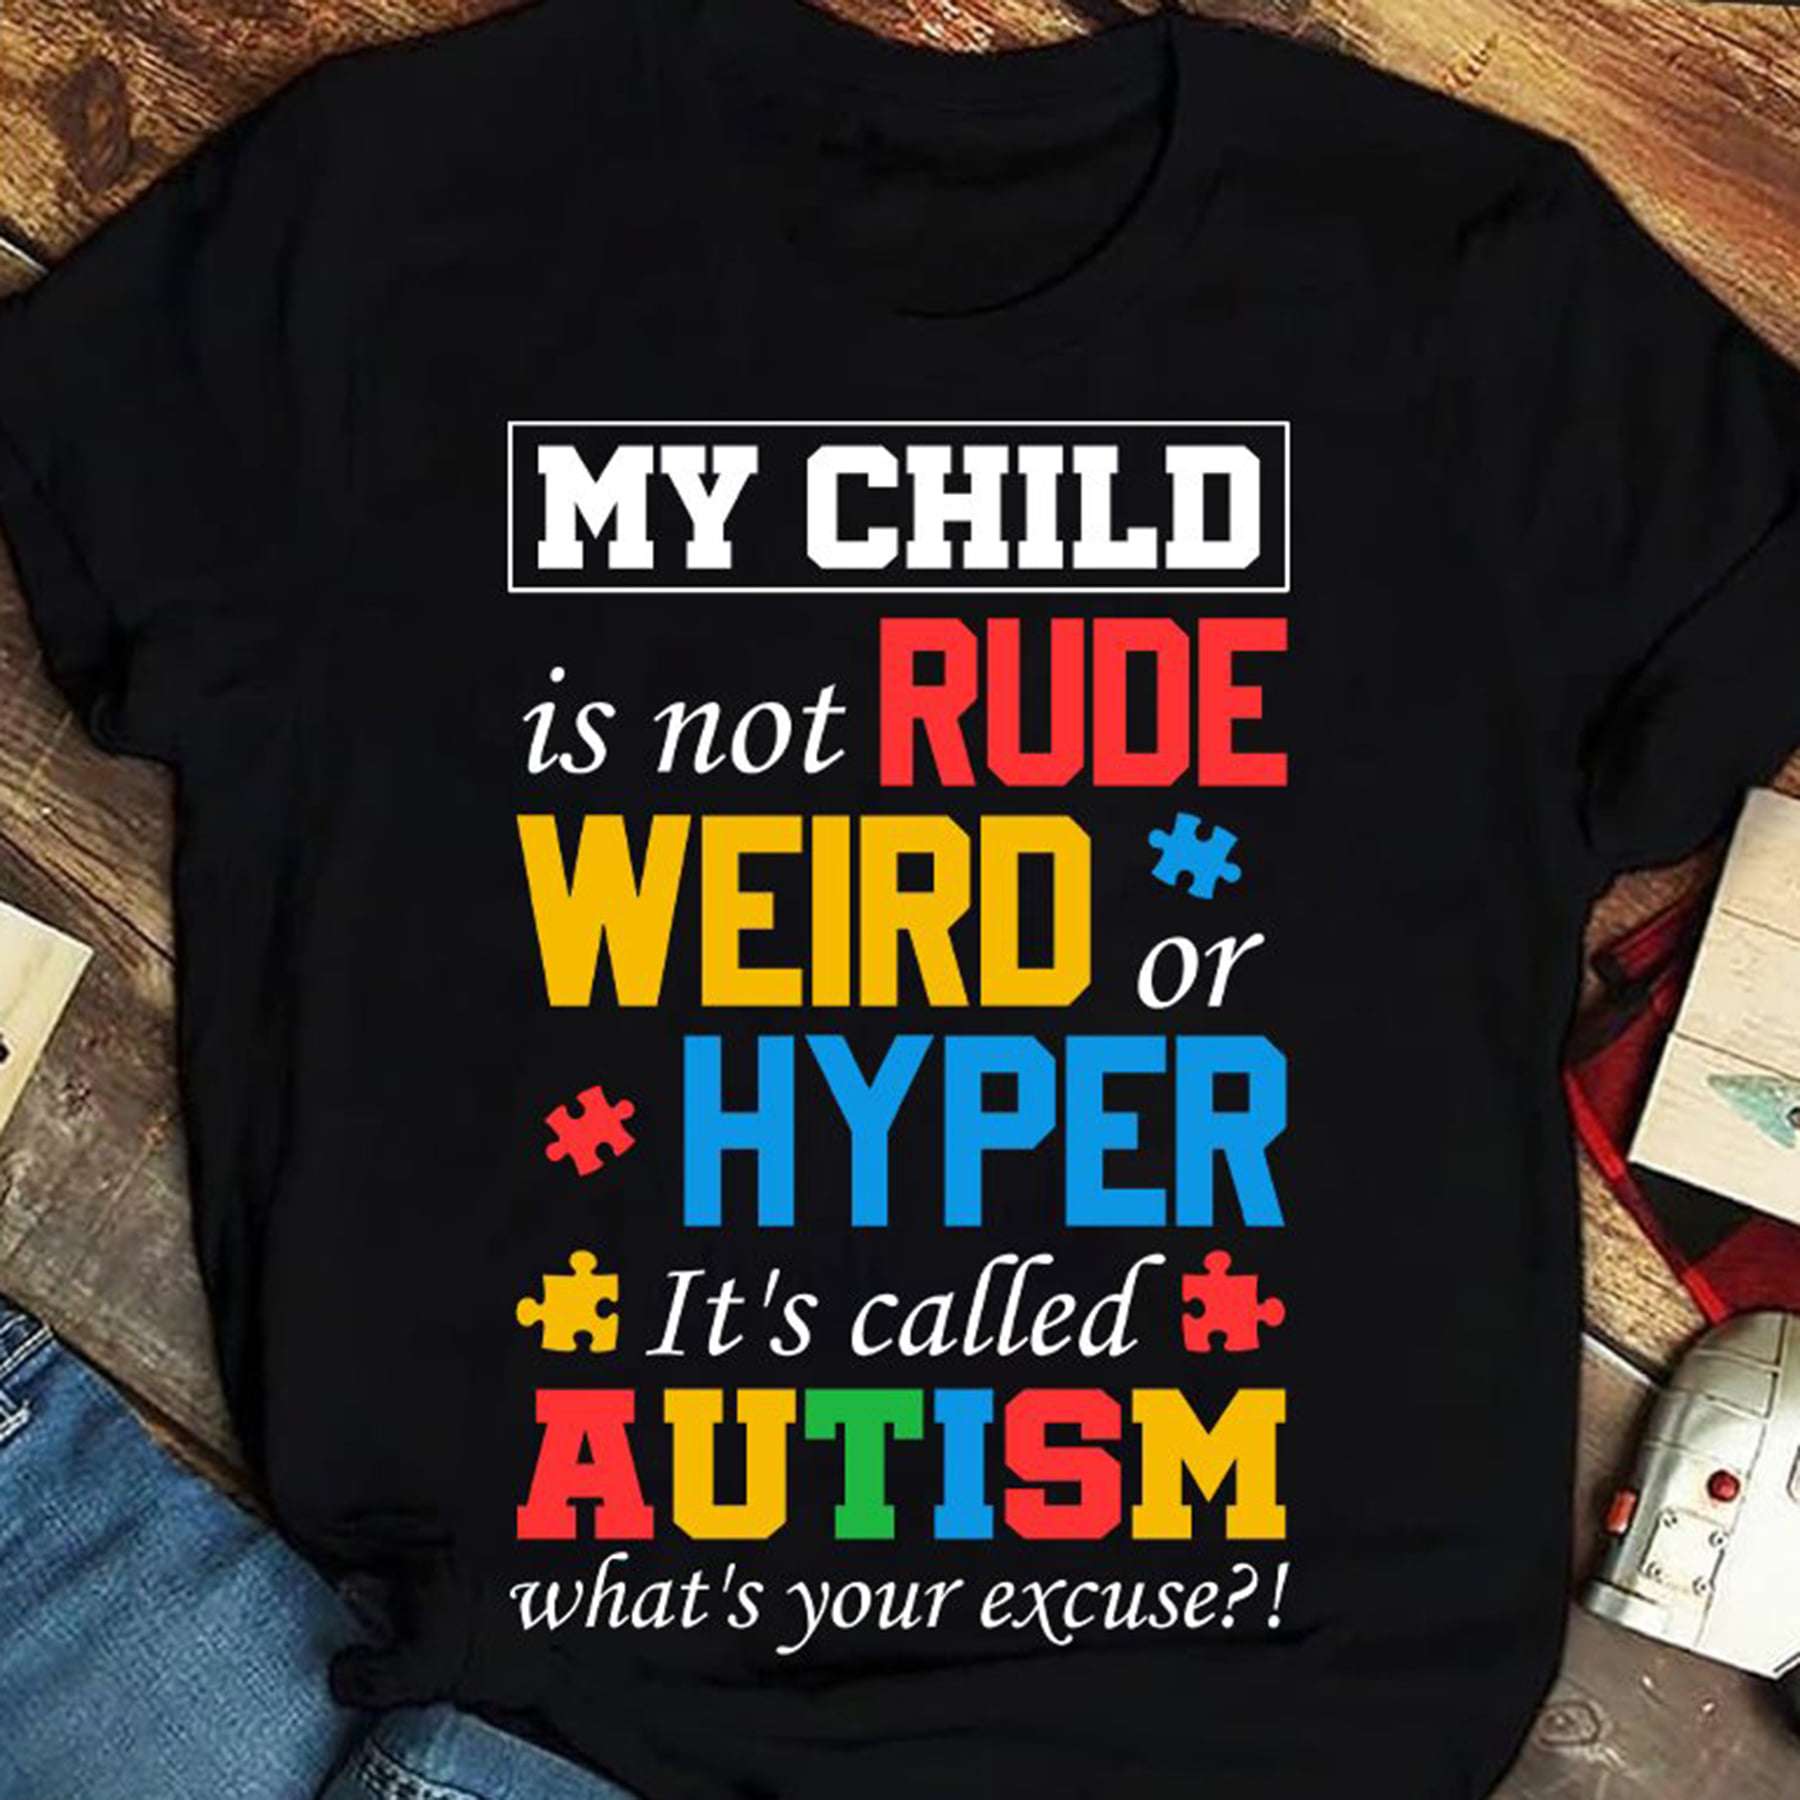 My child is not rude weird or hyper It's called autism - Autism awareness, autism child